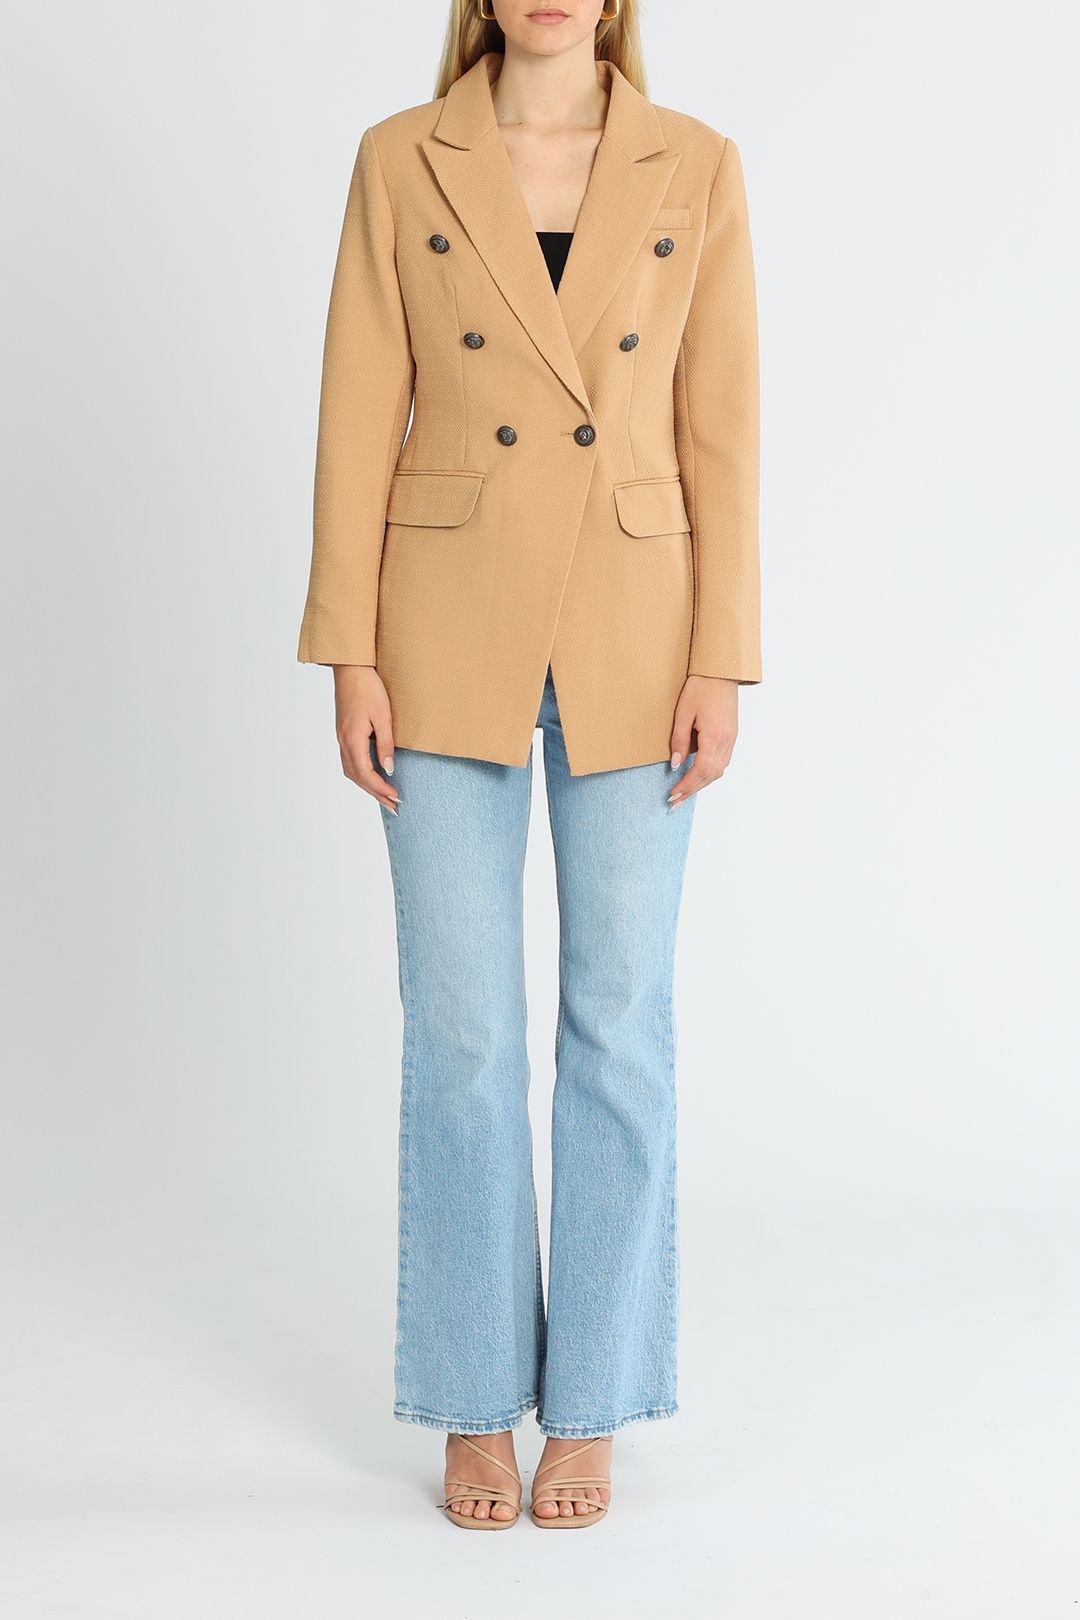 Belle and Bloom Princess Polly Weave Blazer Camel